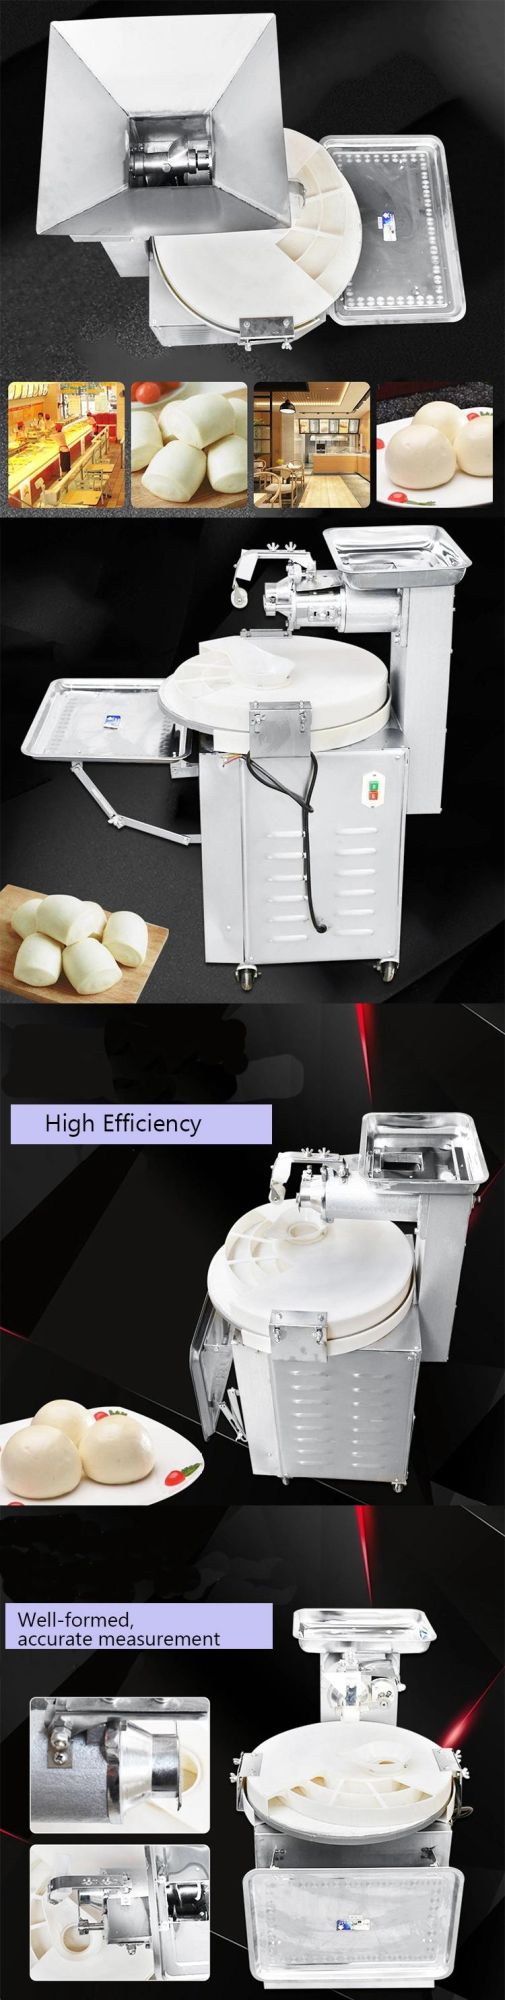 Unique Design Hot Sale Stainless Steel Dough Divider Rounder Machine for Dough Ball Making